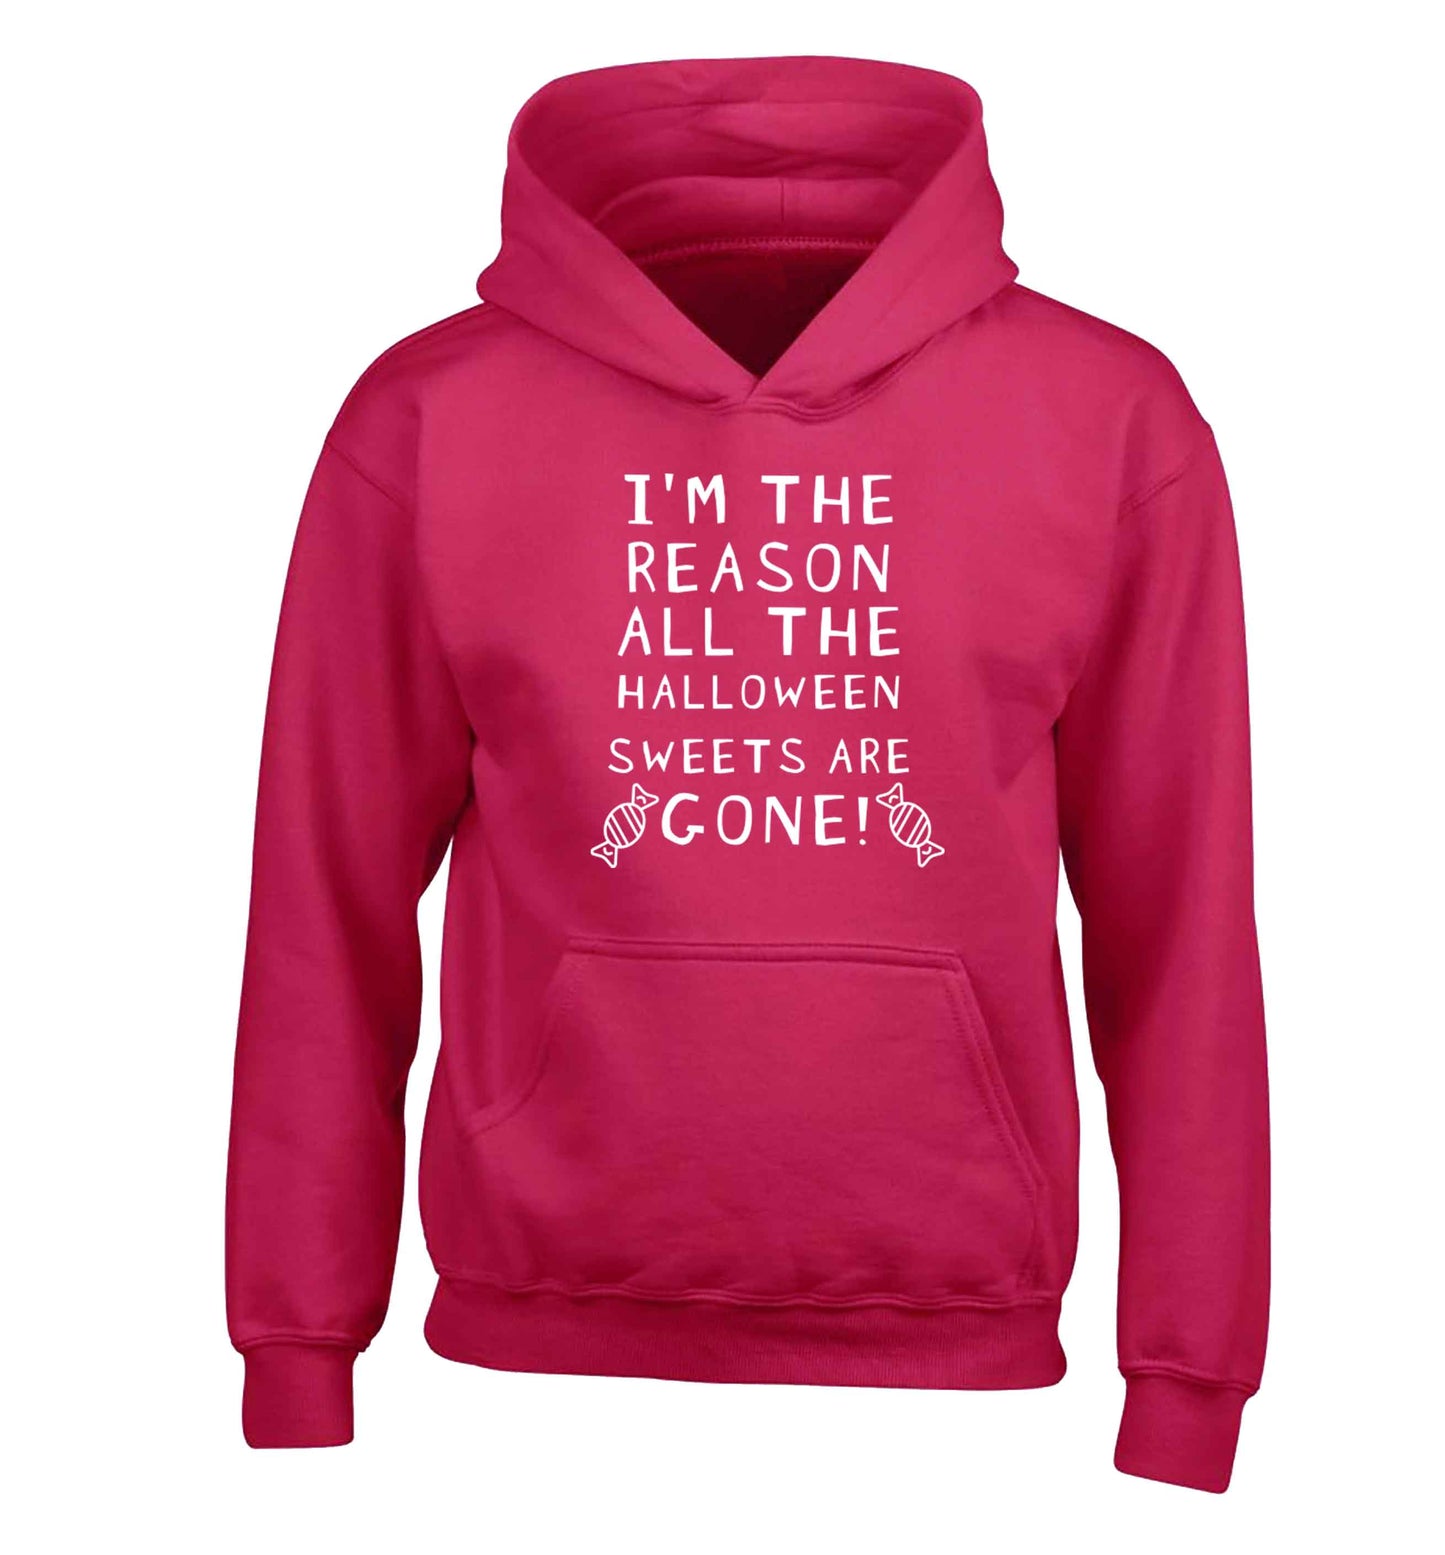 I'm the reason all of the halloween sweets are gone children's pink hoodie 12-13 Years